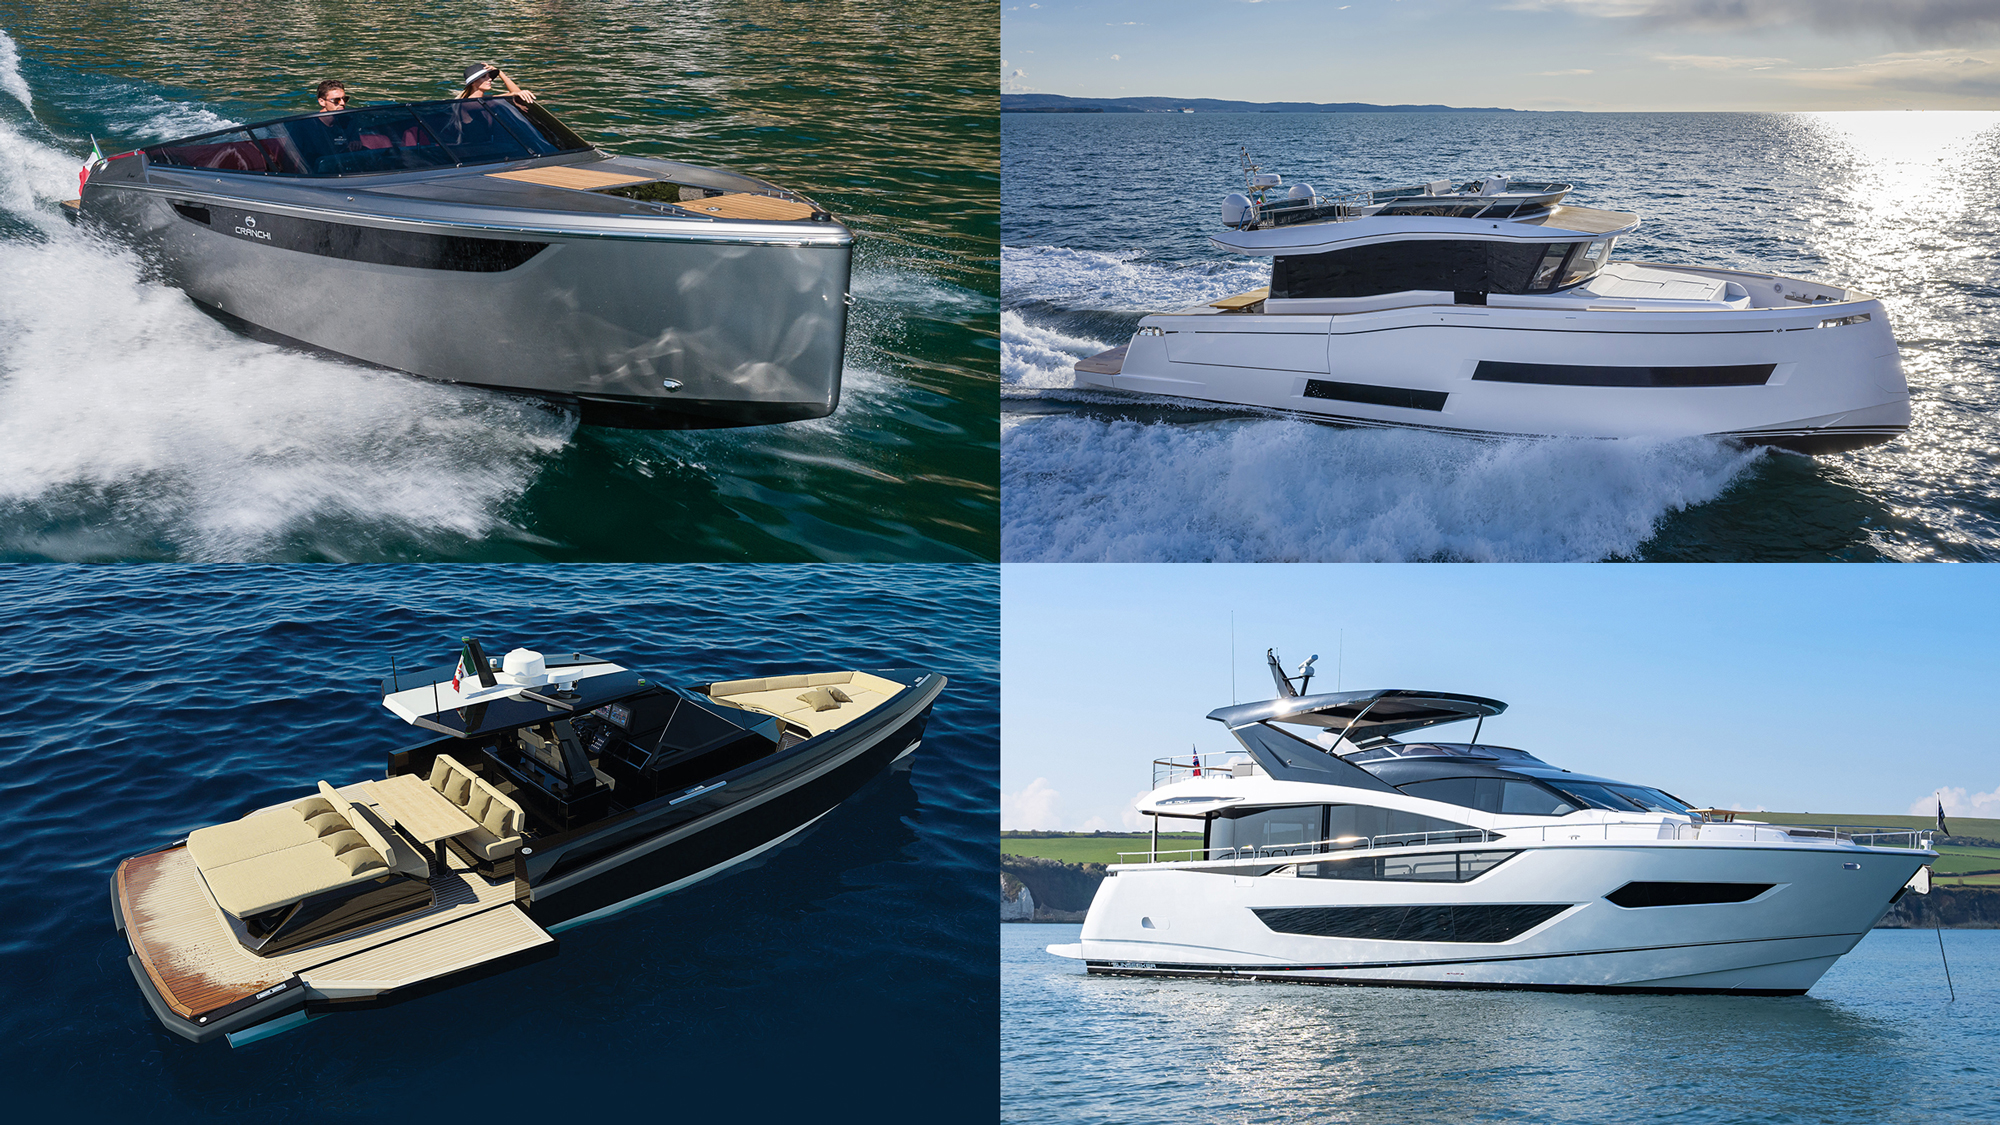 Boat Buying Guide: Factors to Consider When Buying a Boat